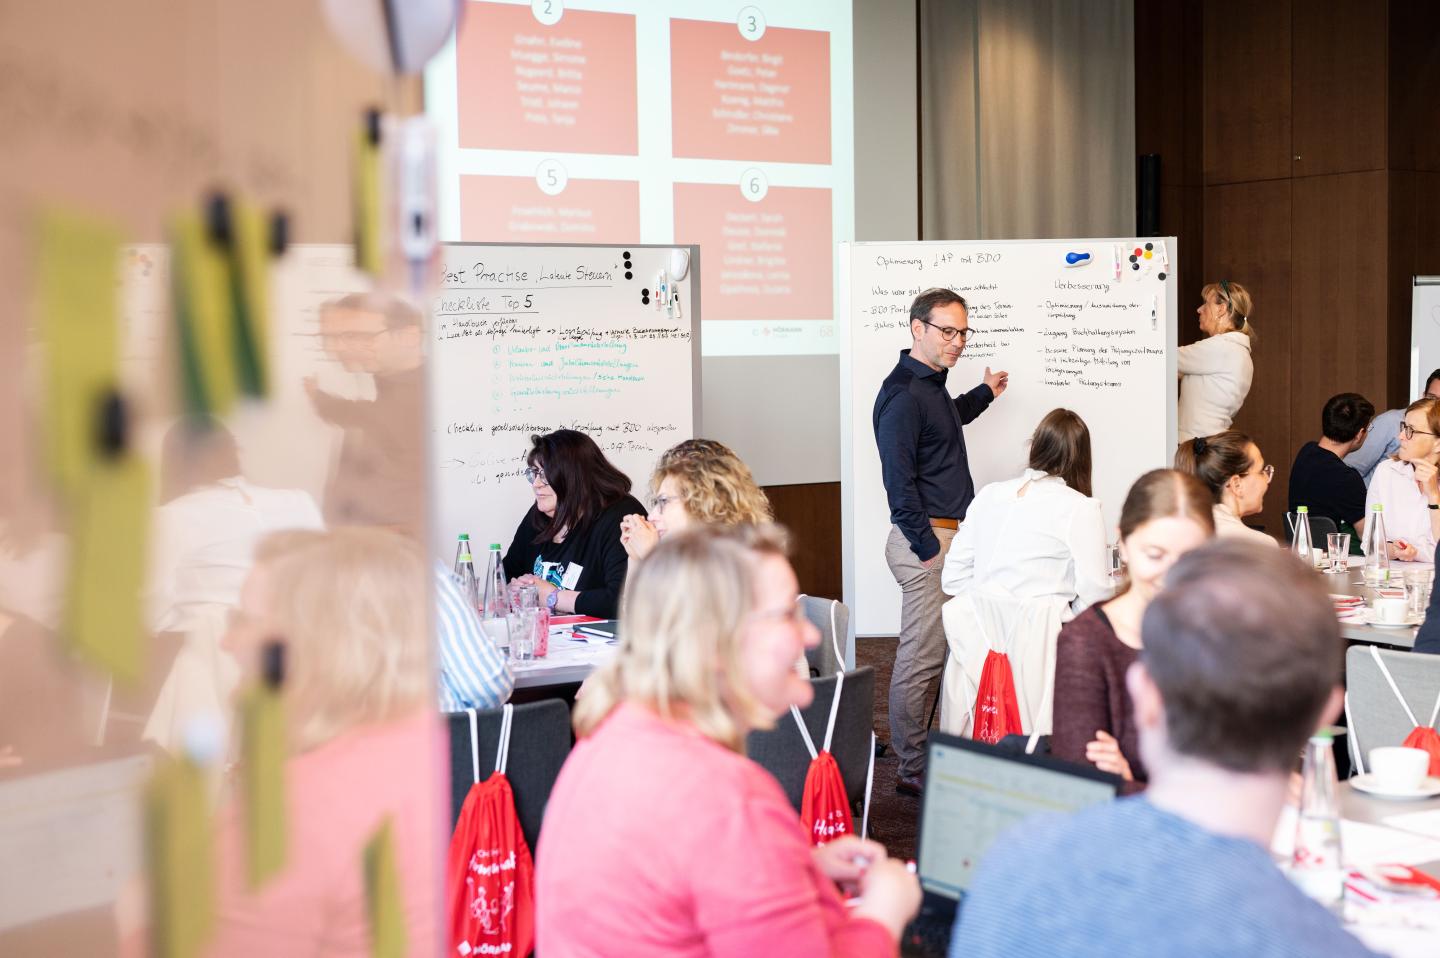 HÖRMANN Group: FIGURES, DATA, FACTS but above all lots of fun at the Finance Day in Würzburg